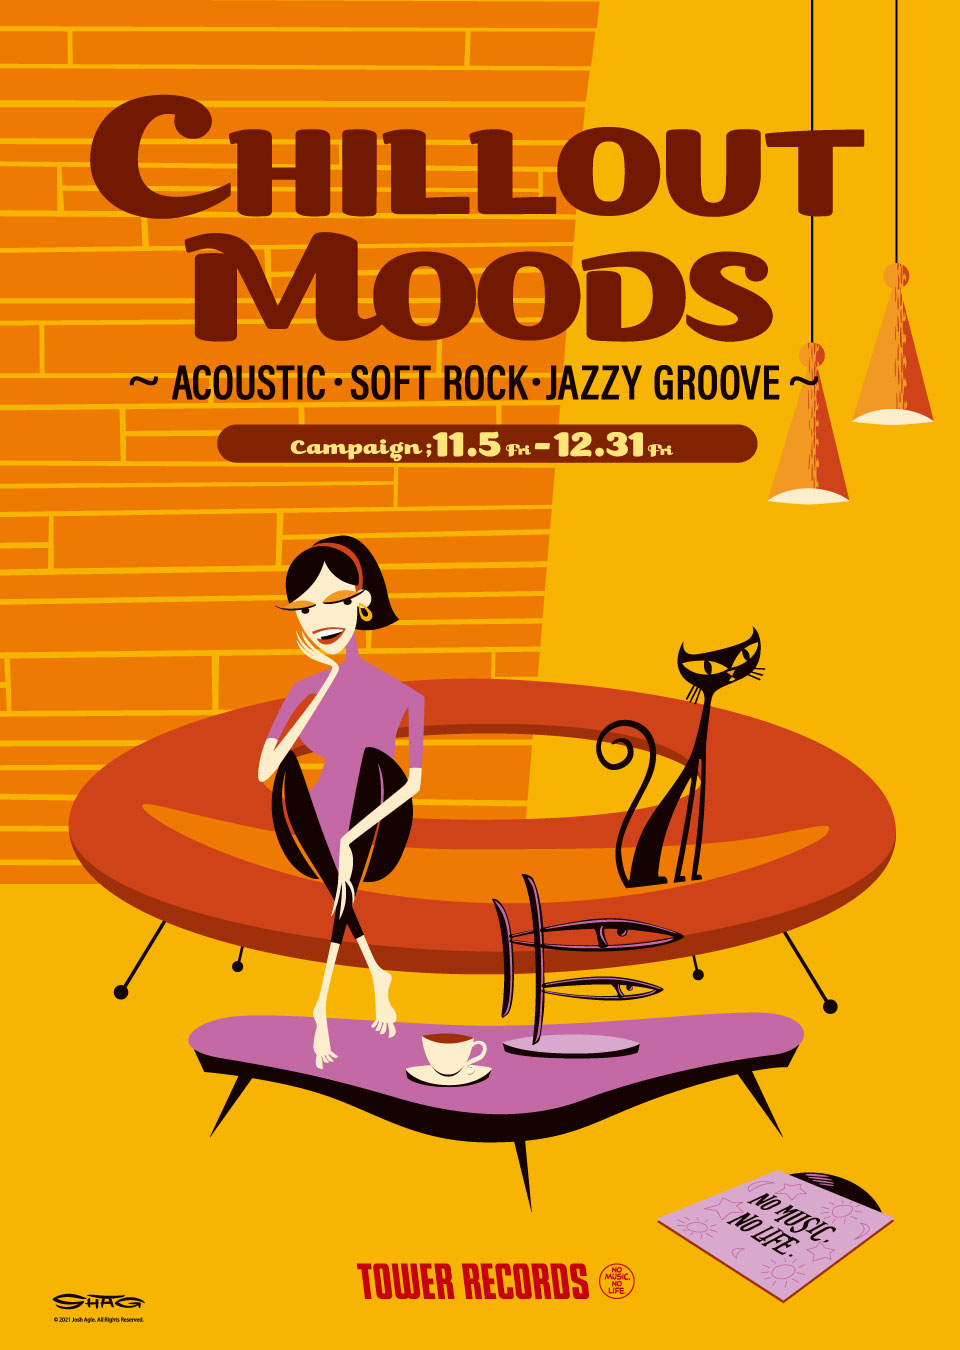 CHILLOUT MOODS ～ACOUSTIC・SOFT ROCK・JAZZY HIP HOP～